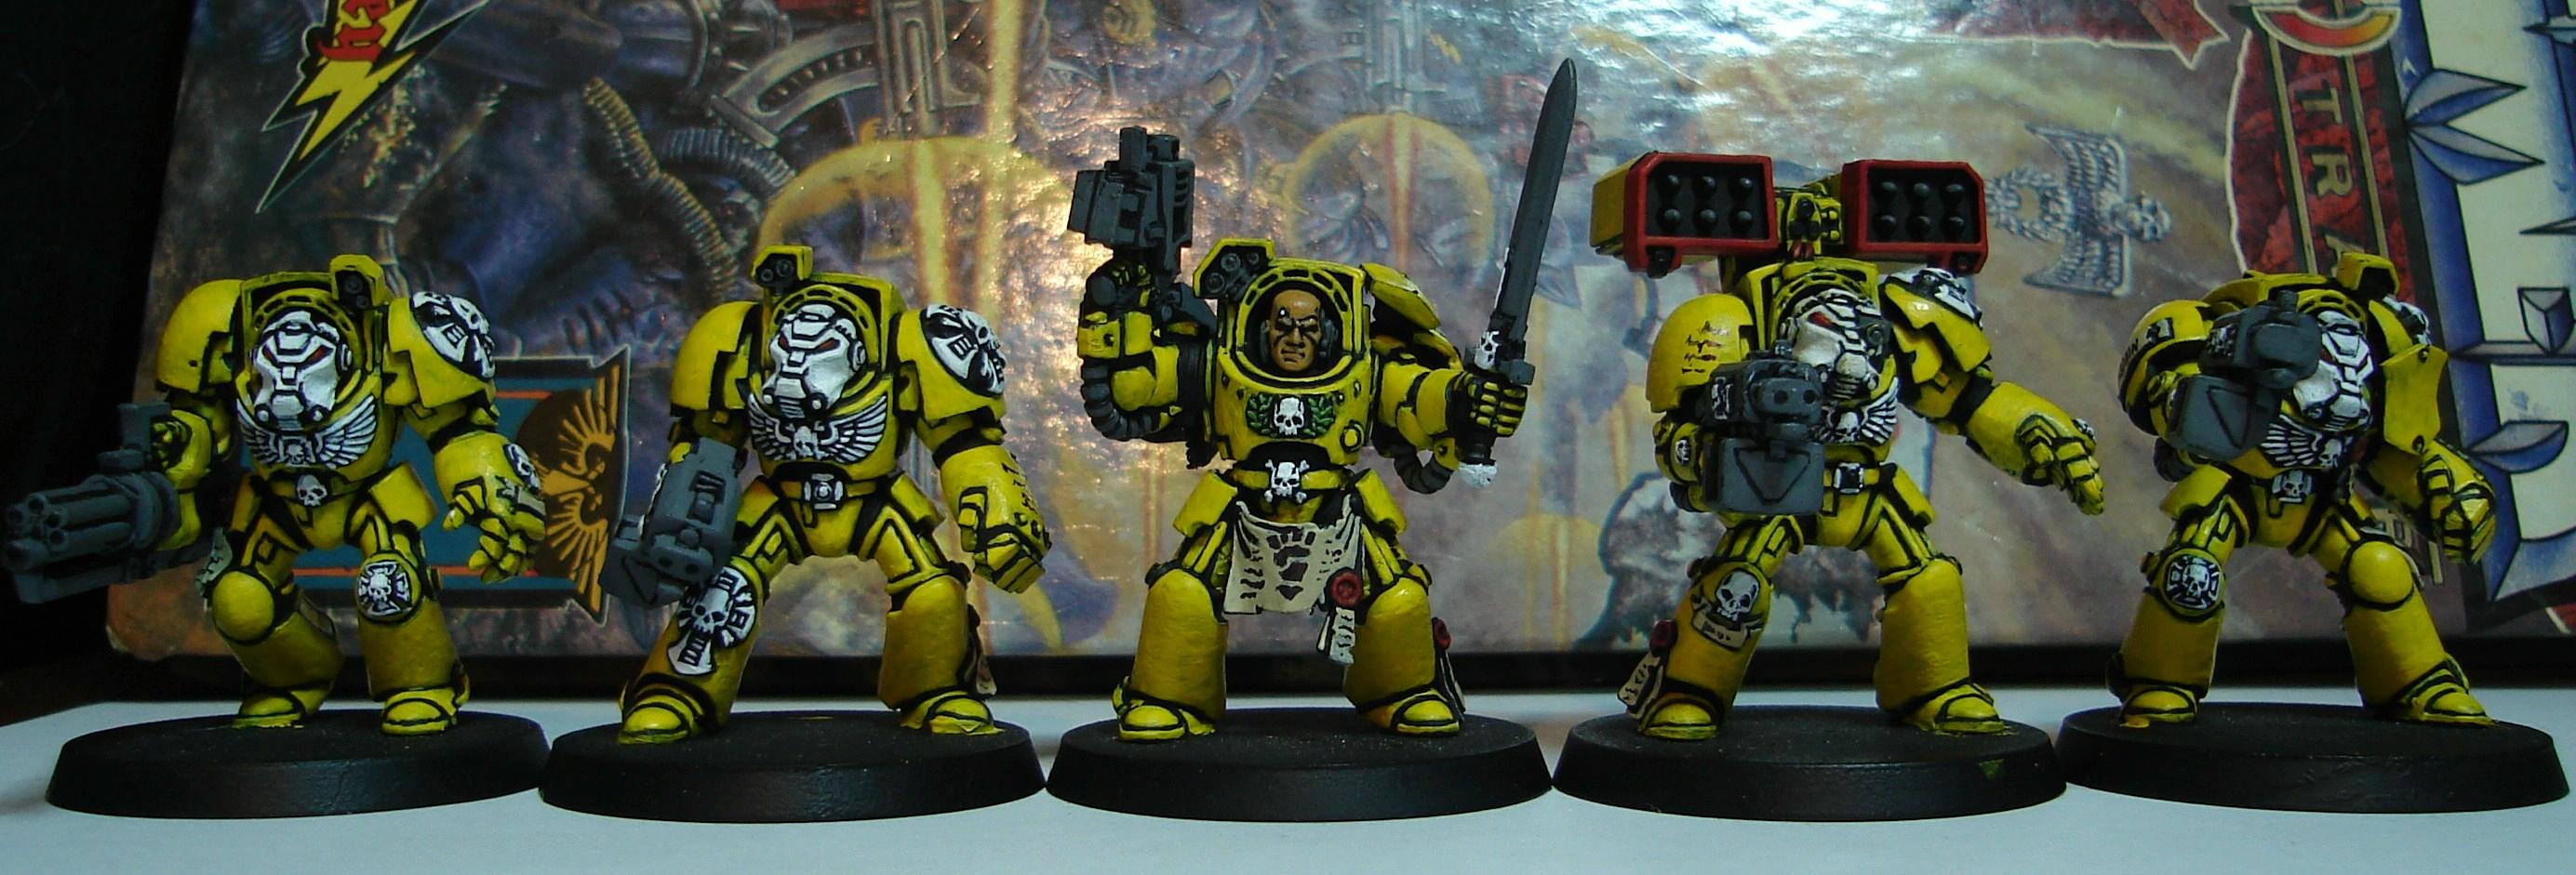 Assault Cannon, Imperial Fists, Space Marines, Terminator Armor, Warhammer 40,000, Yellow